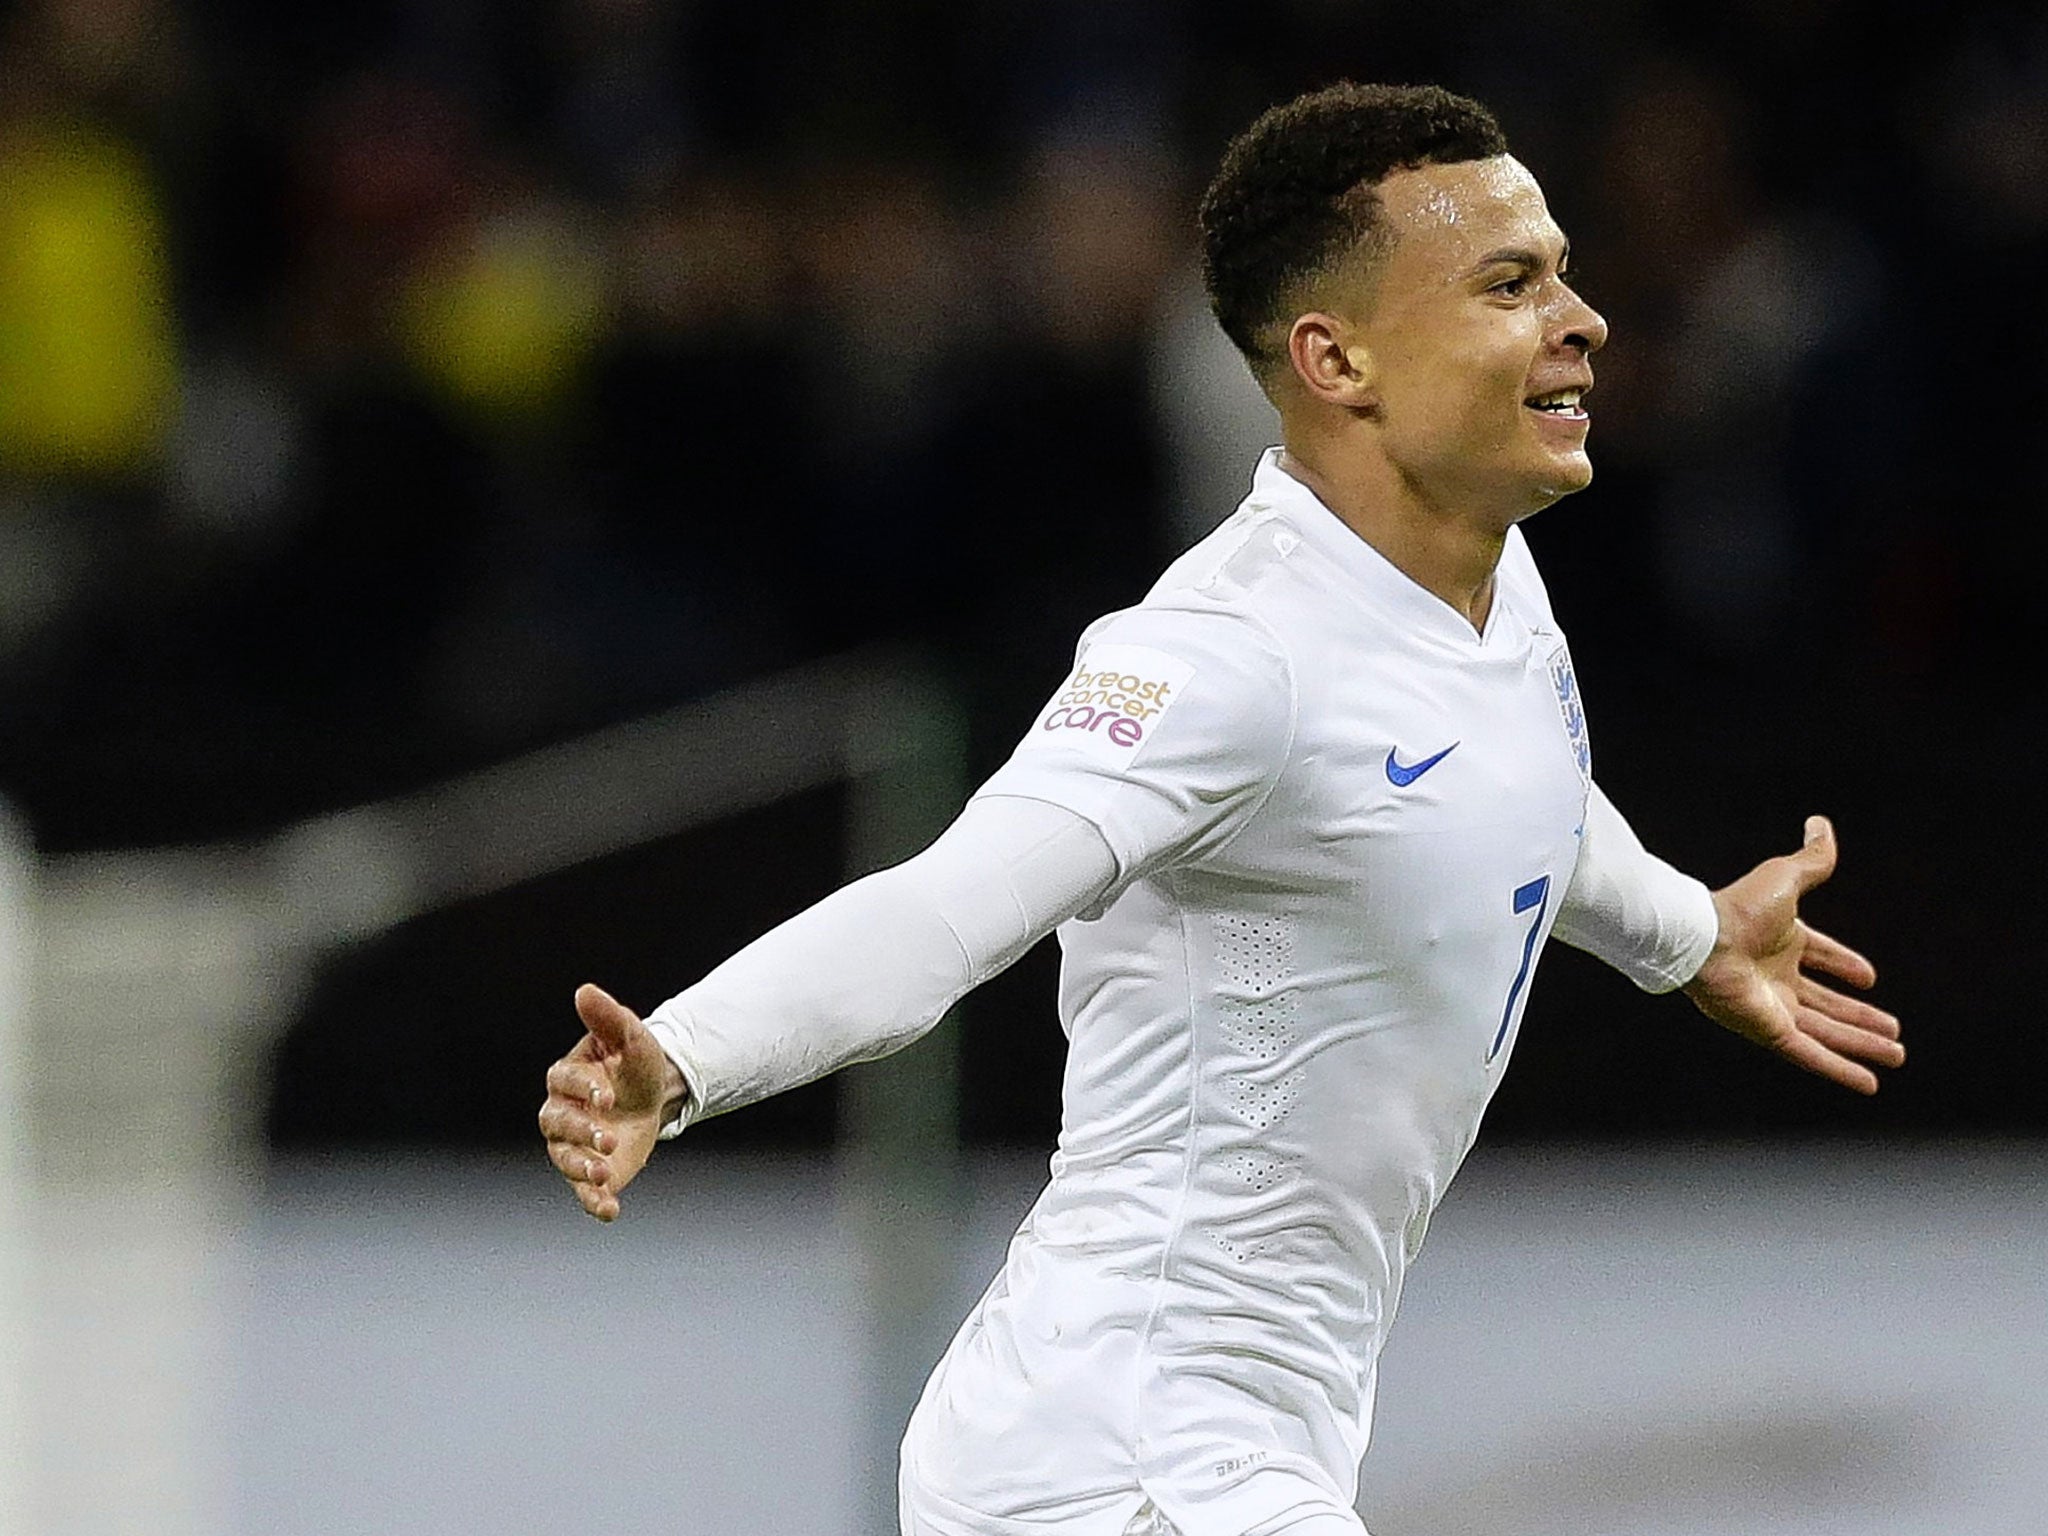 Tottenham's Dele Alli learnt his trade at MK Dons